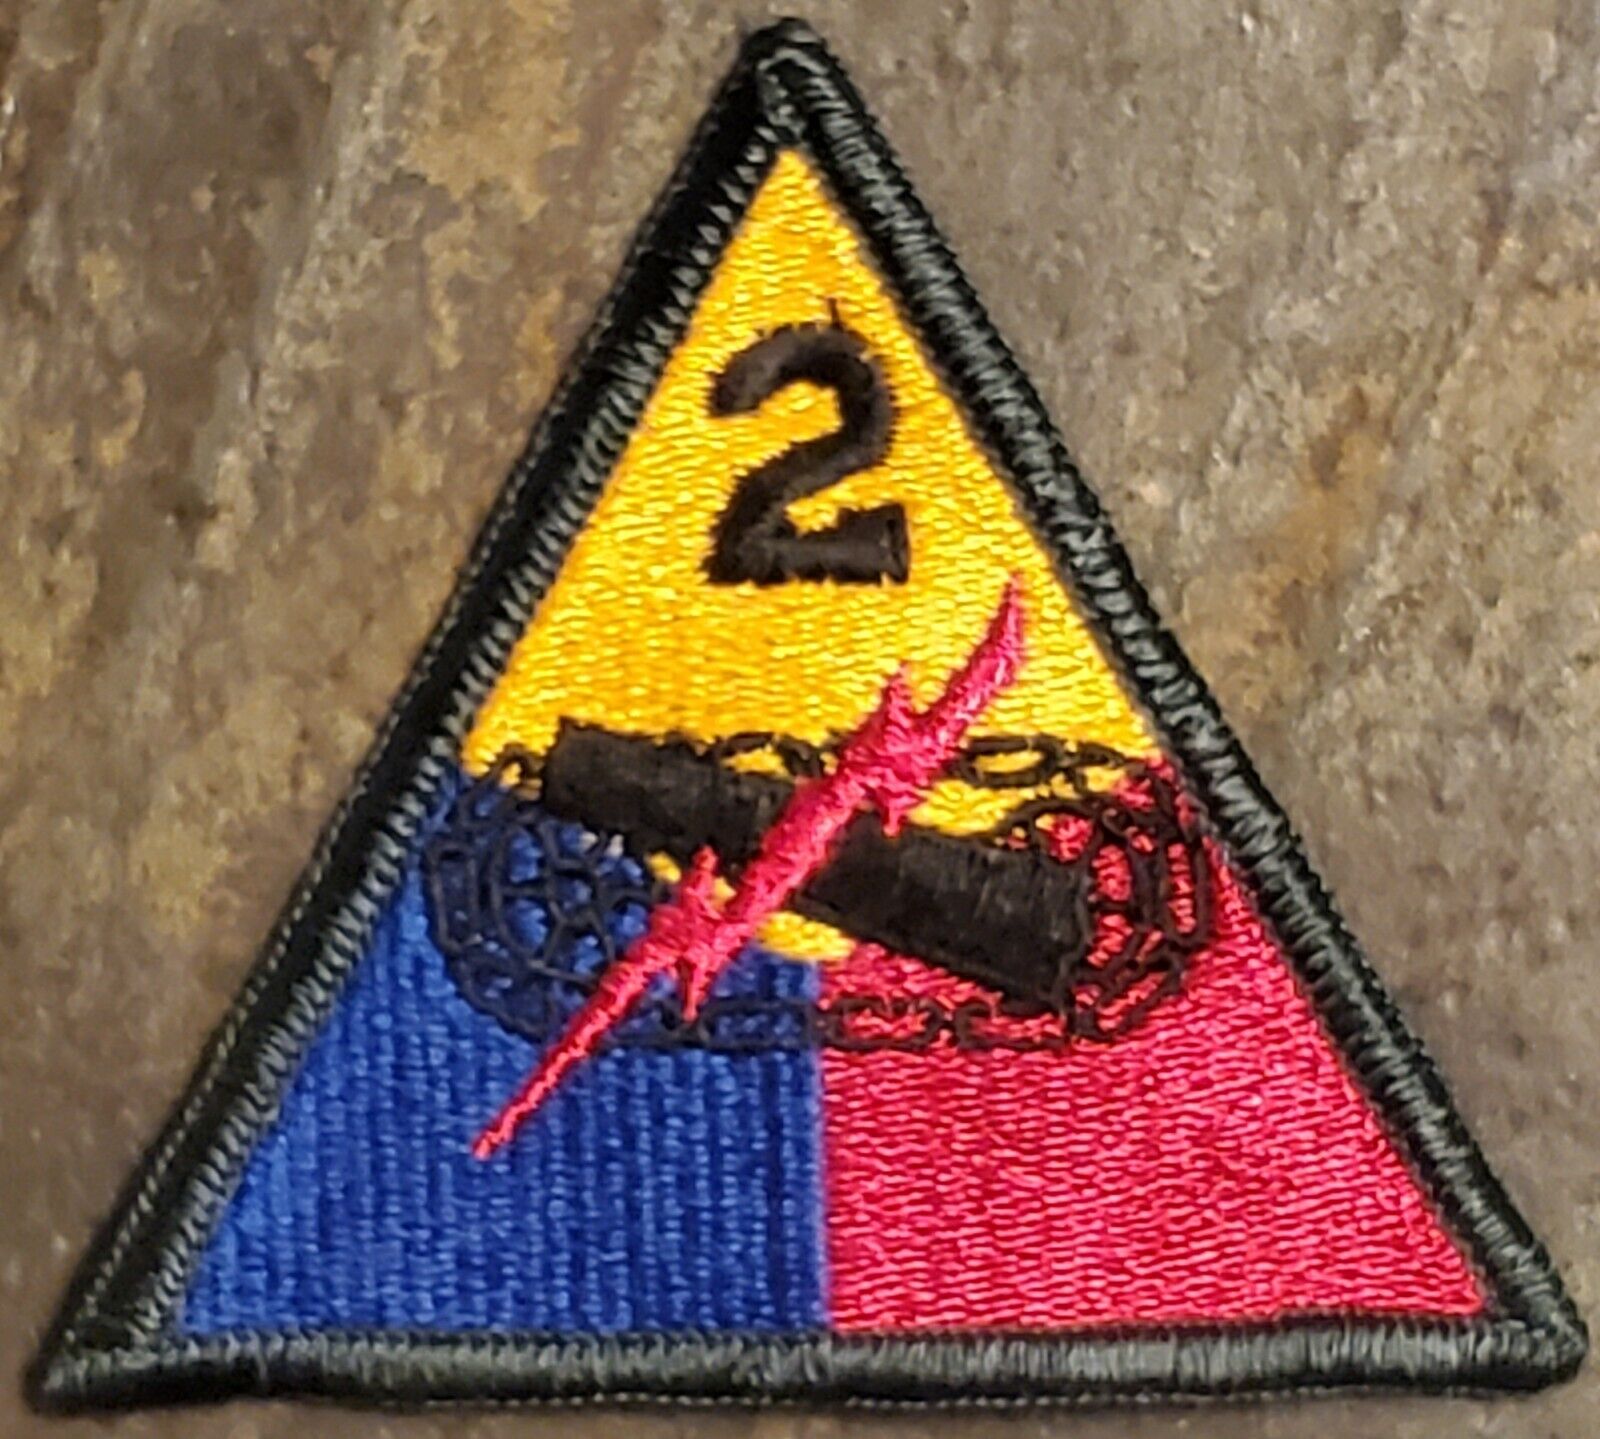 US Army Second 2nd Armored ARMOR Division Full Color Patch NOS 